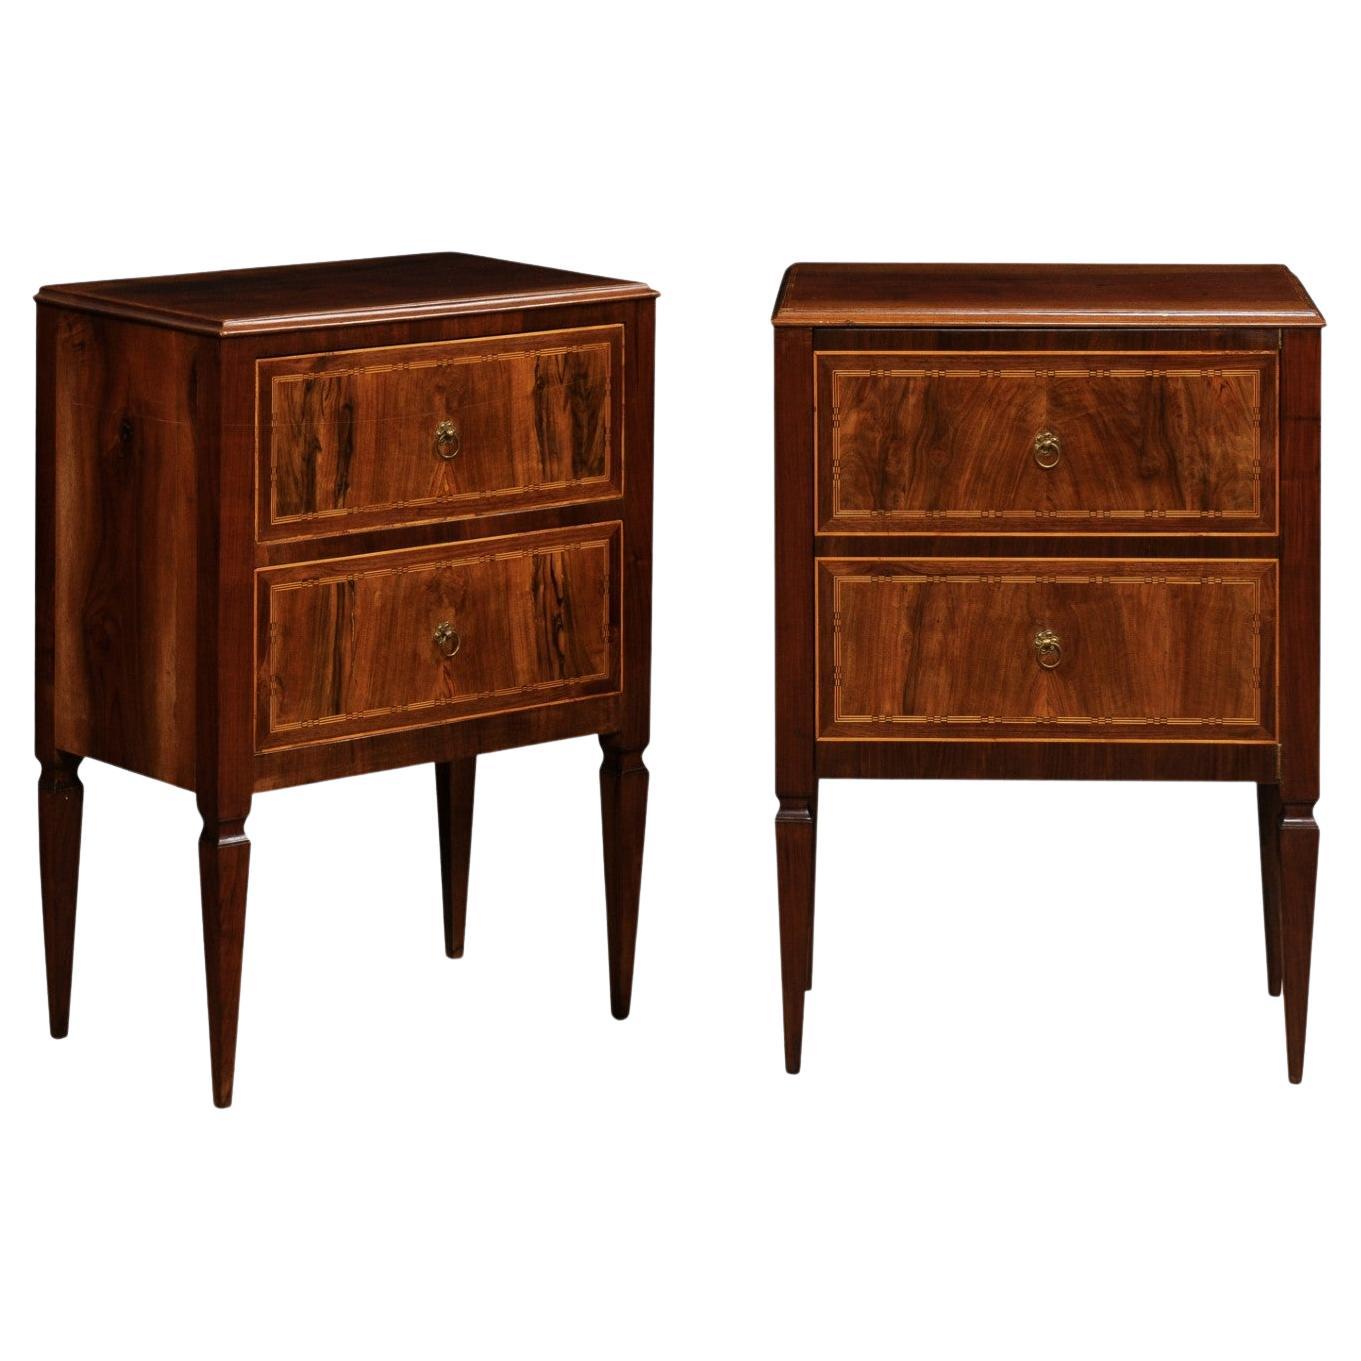 Pair of Italian Neoclassical 18th Century Walnut and Mahogany Bedside Tables